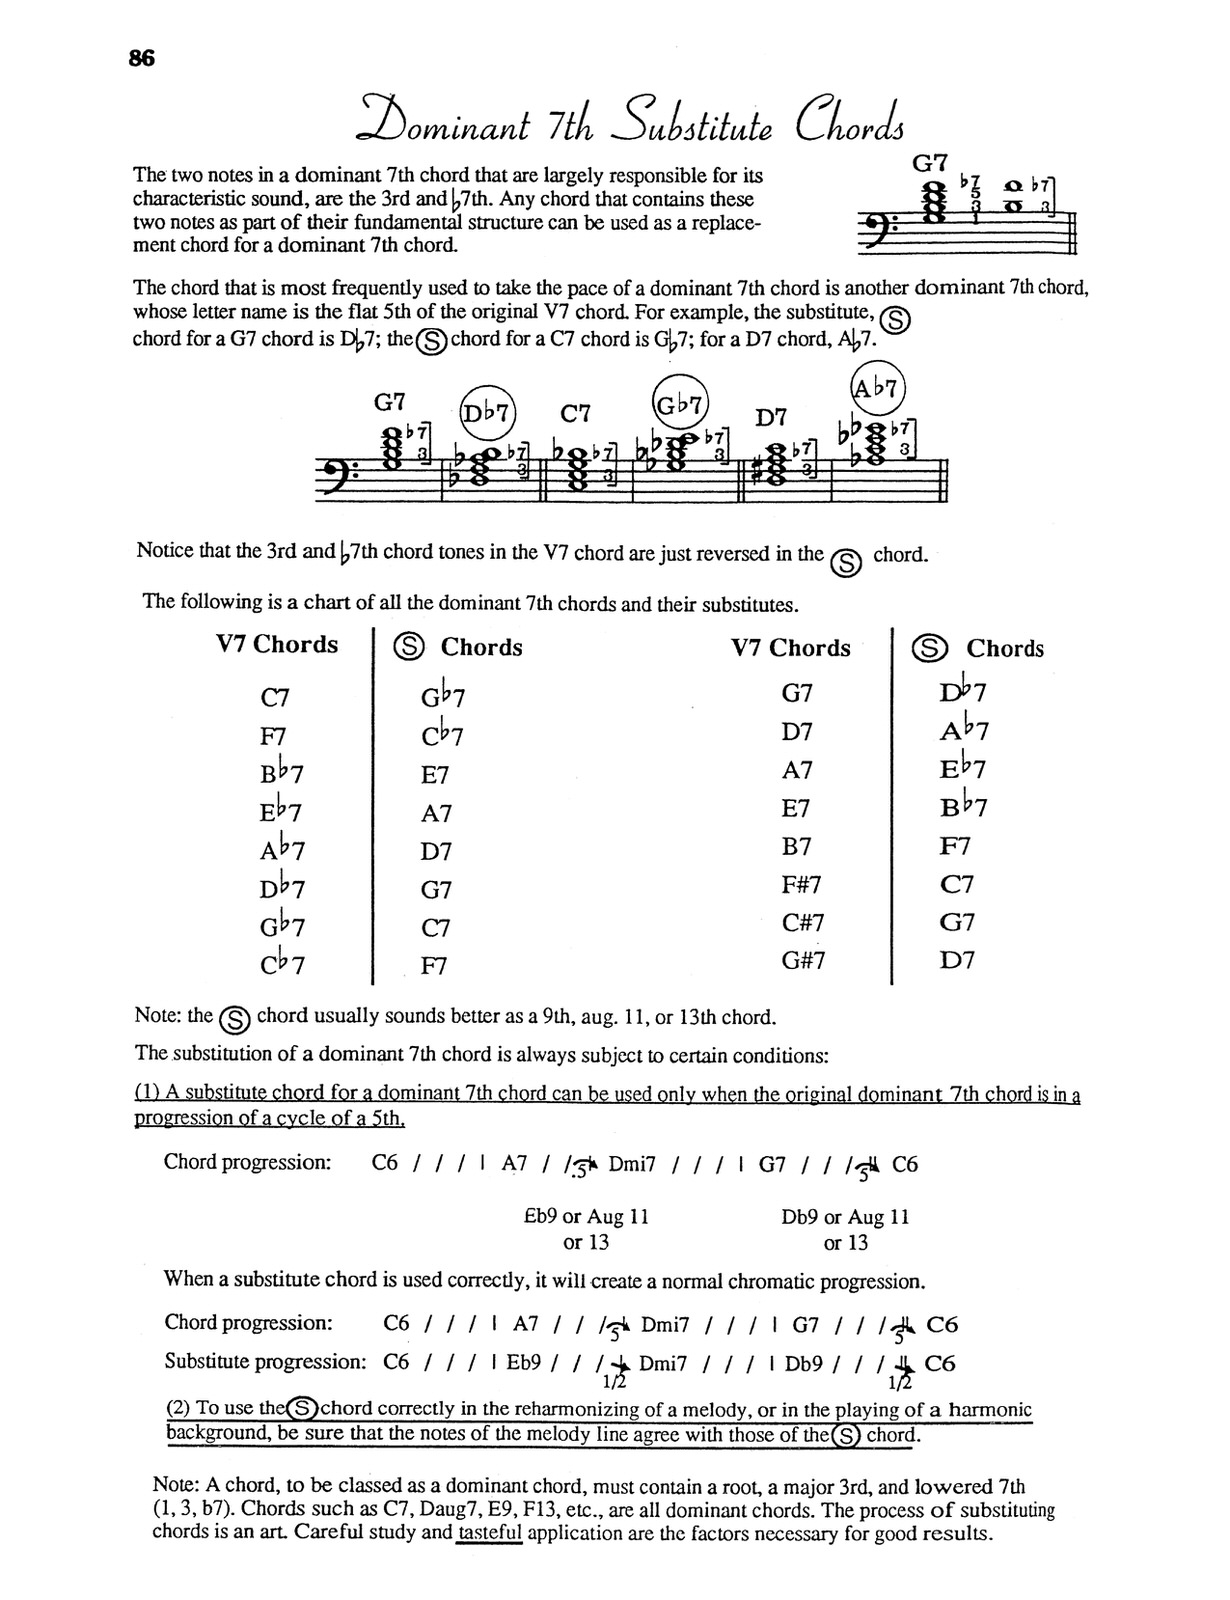 Chords & Progressions (Bass Clef) – Charles Colin Music